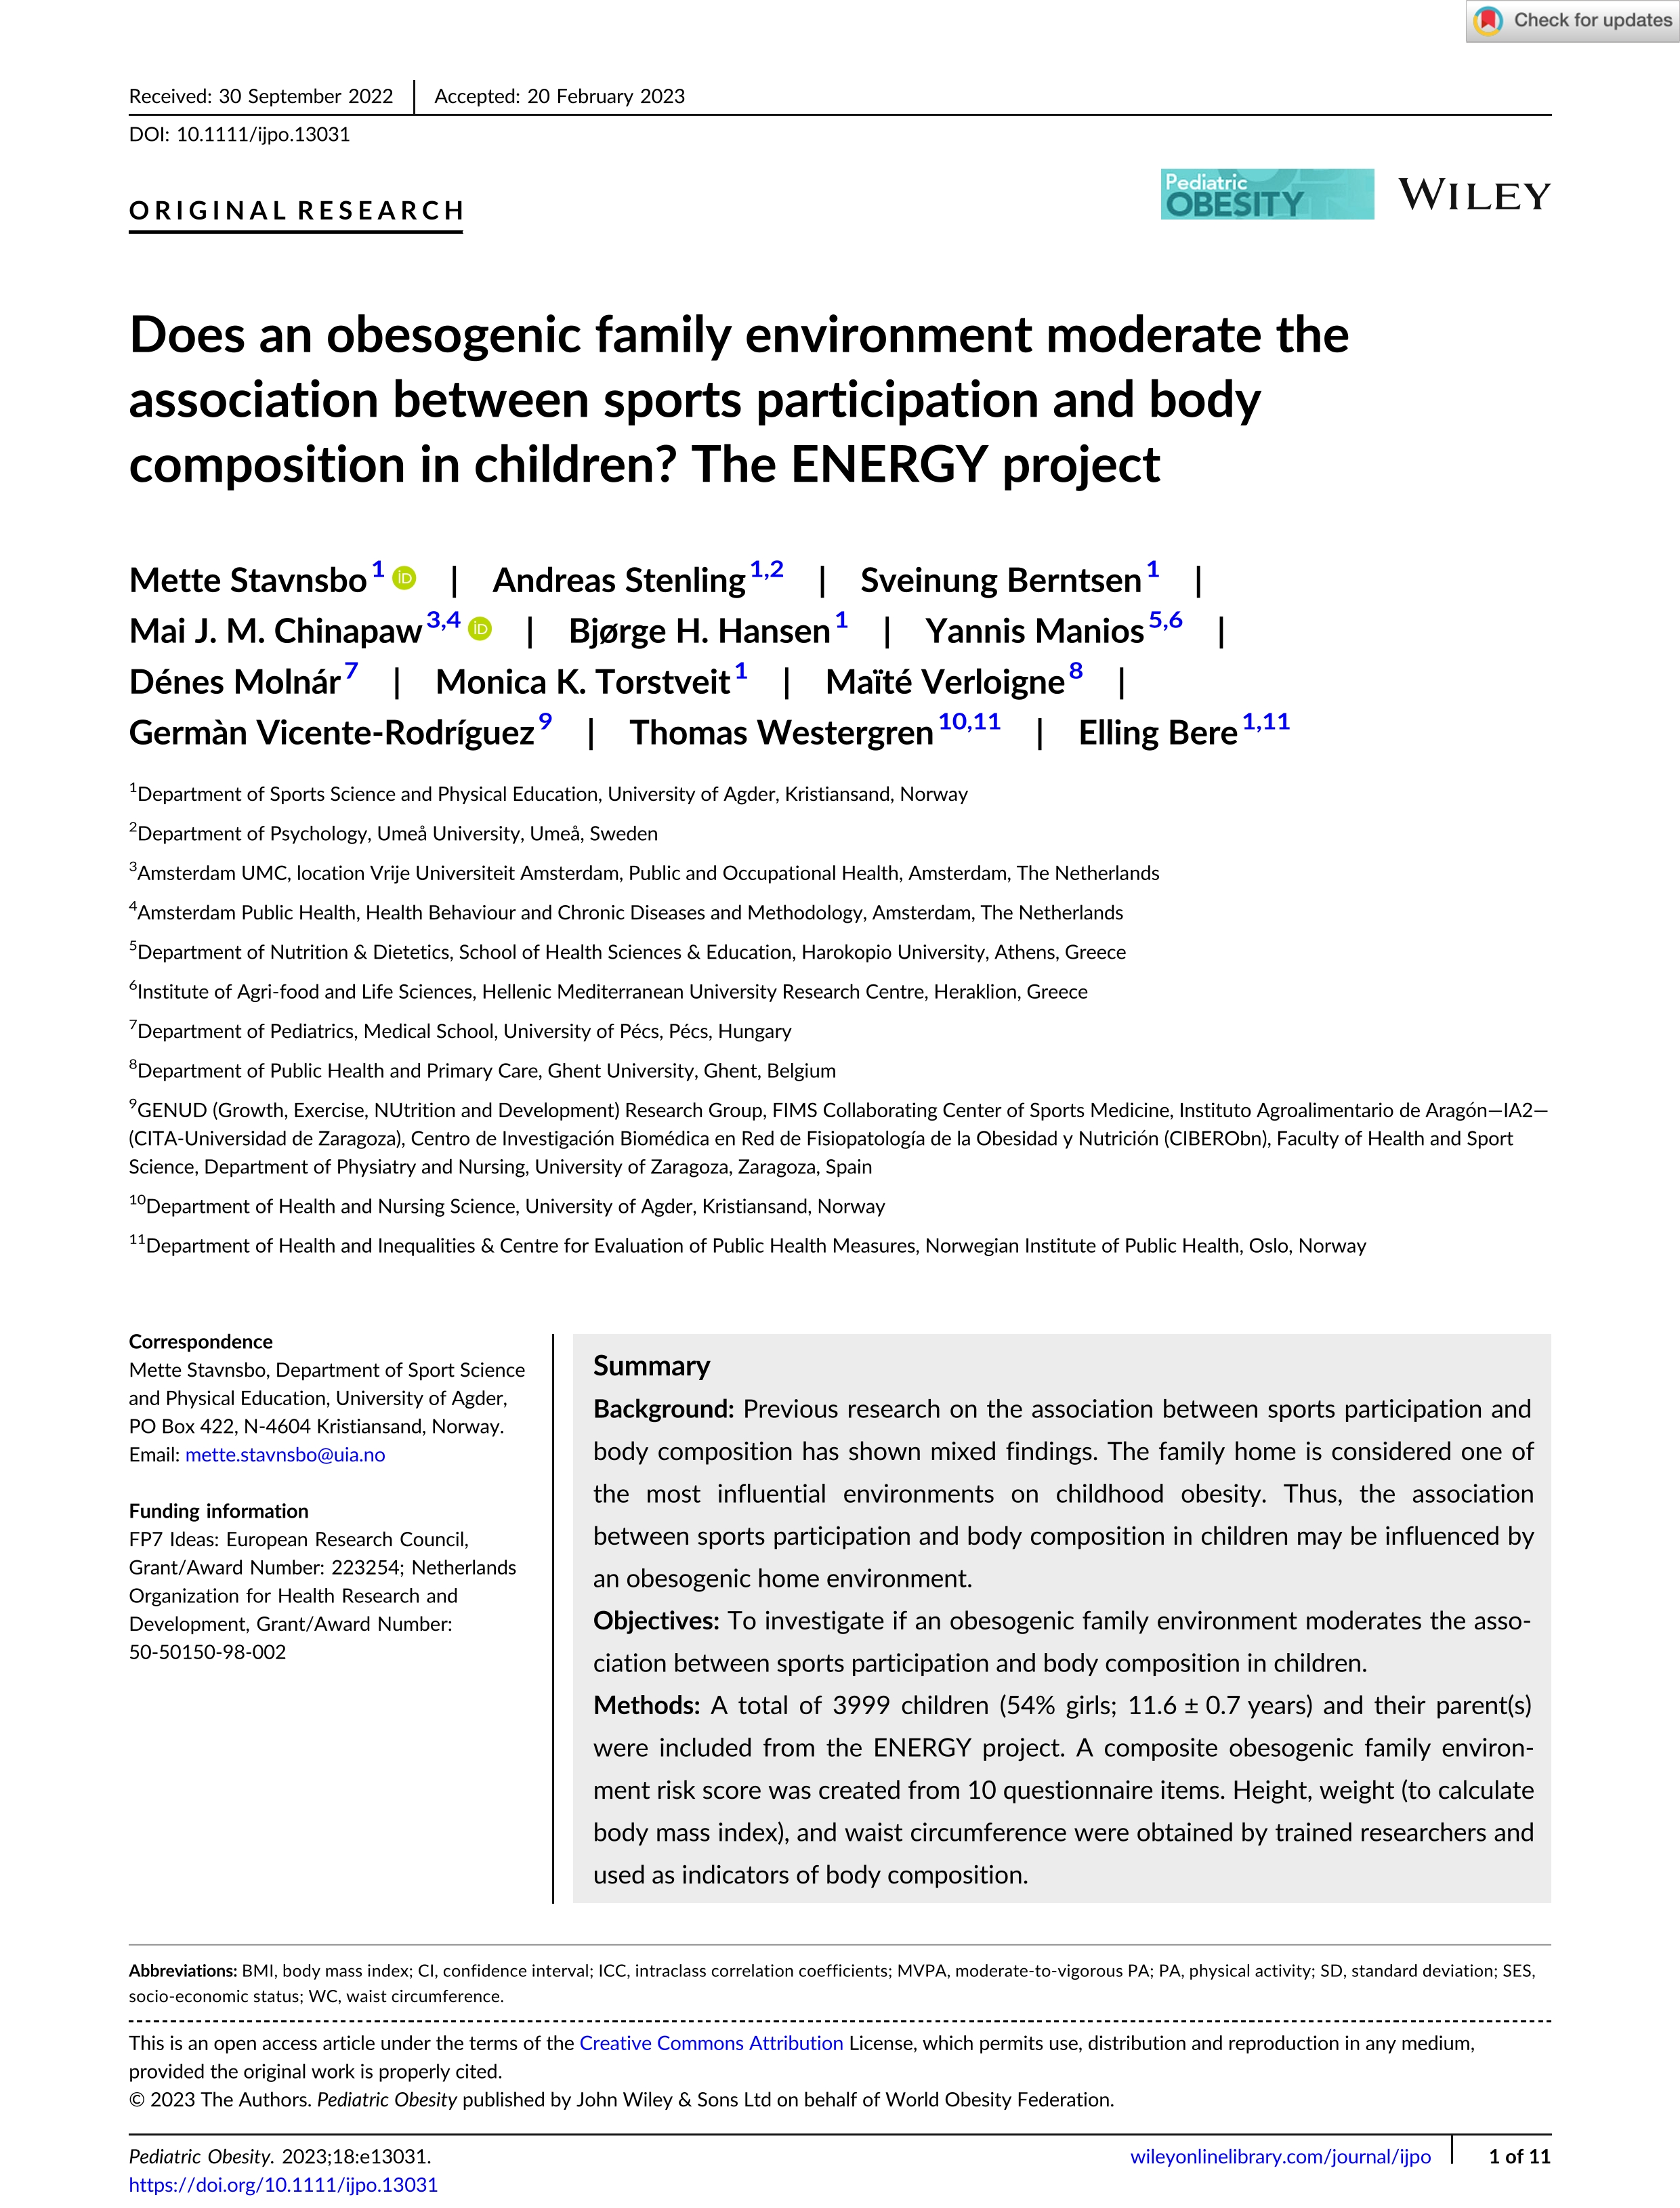 Does an obesogenic family environment moderate the association between sports participation and body composition in children? The ENERGY project